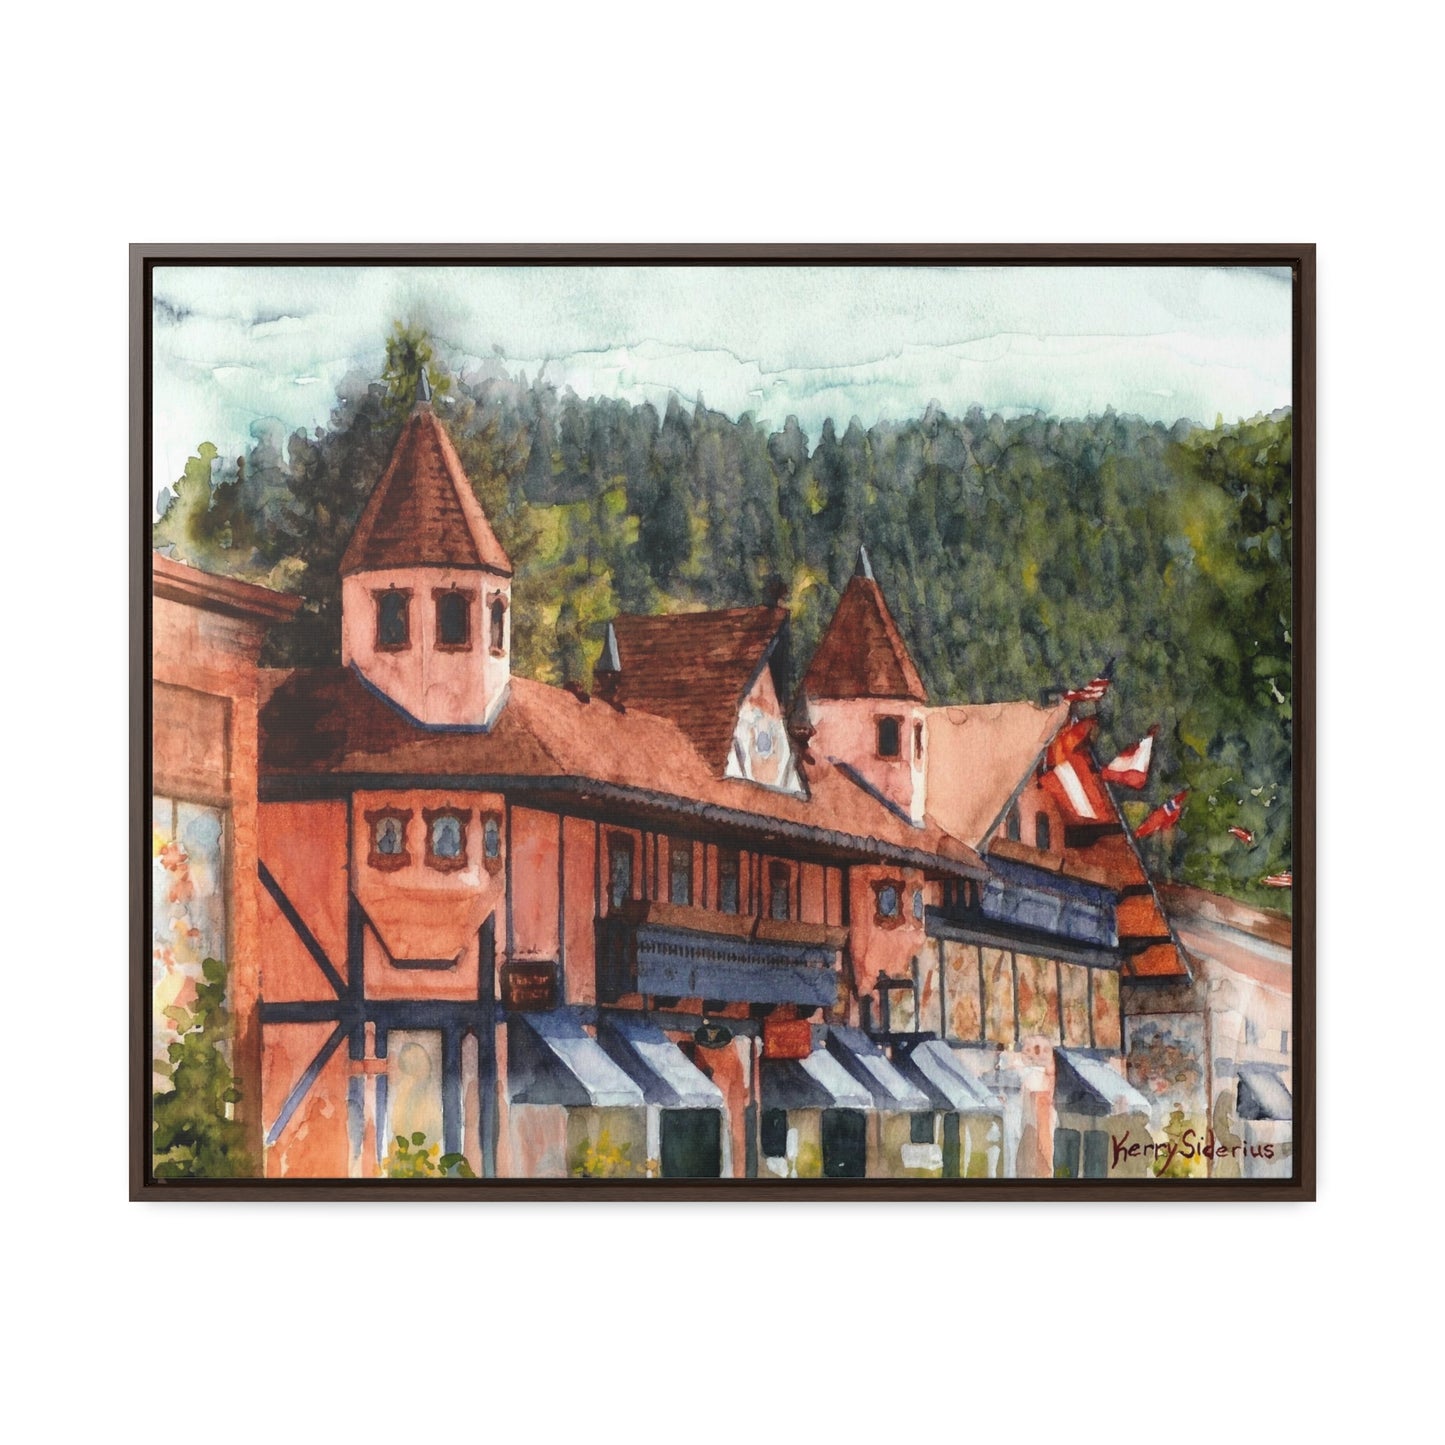 "Leavenworth Street" Gallery Wrapped Canvas, Wood Framed - Kerry Siderius Art 